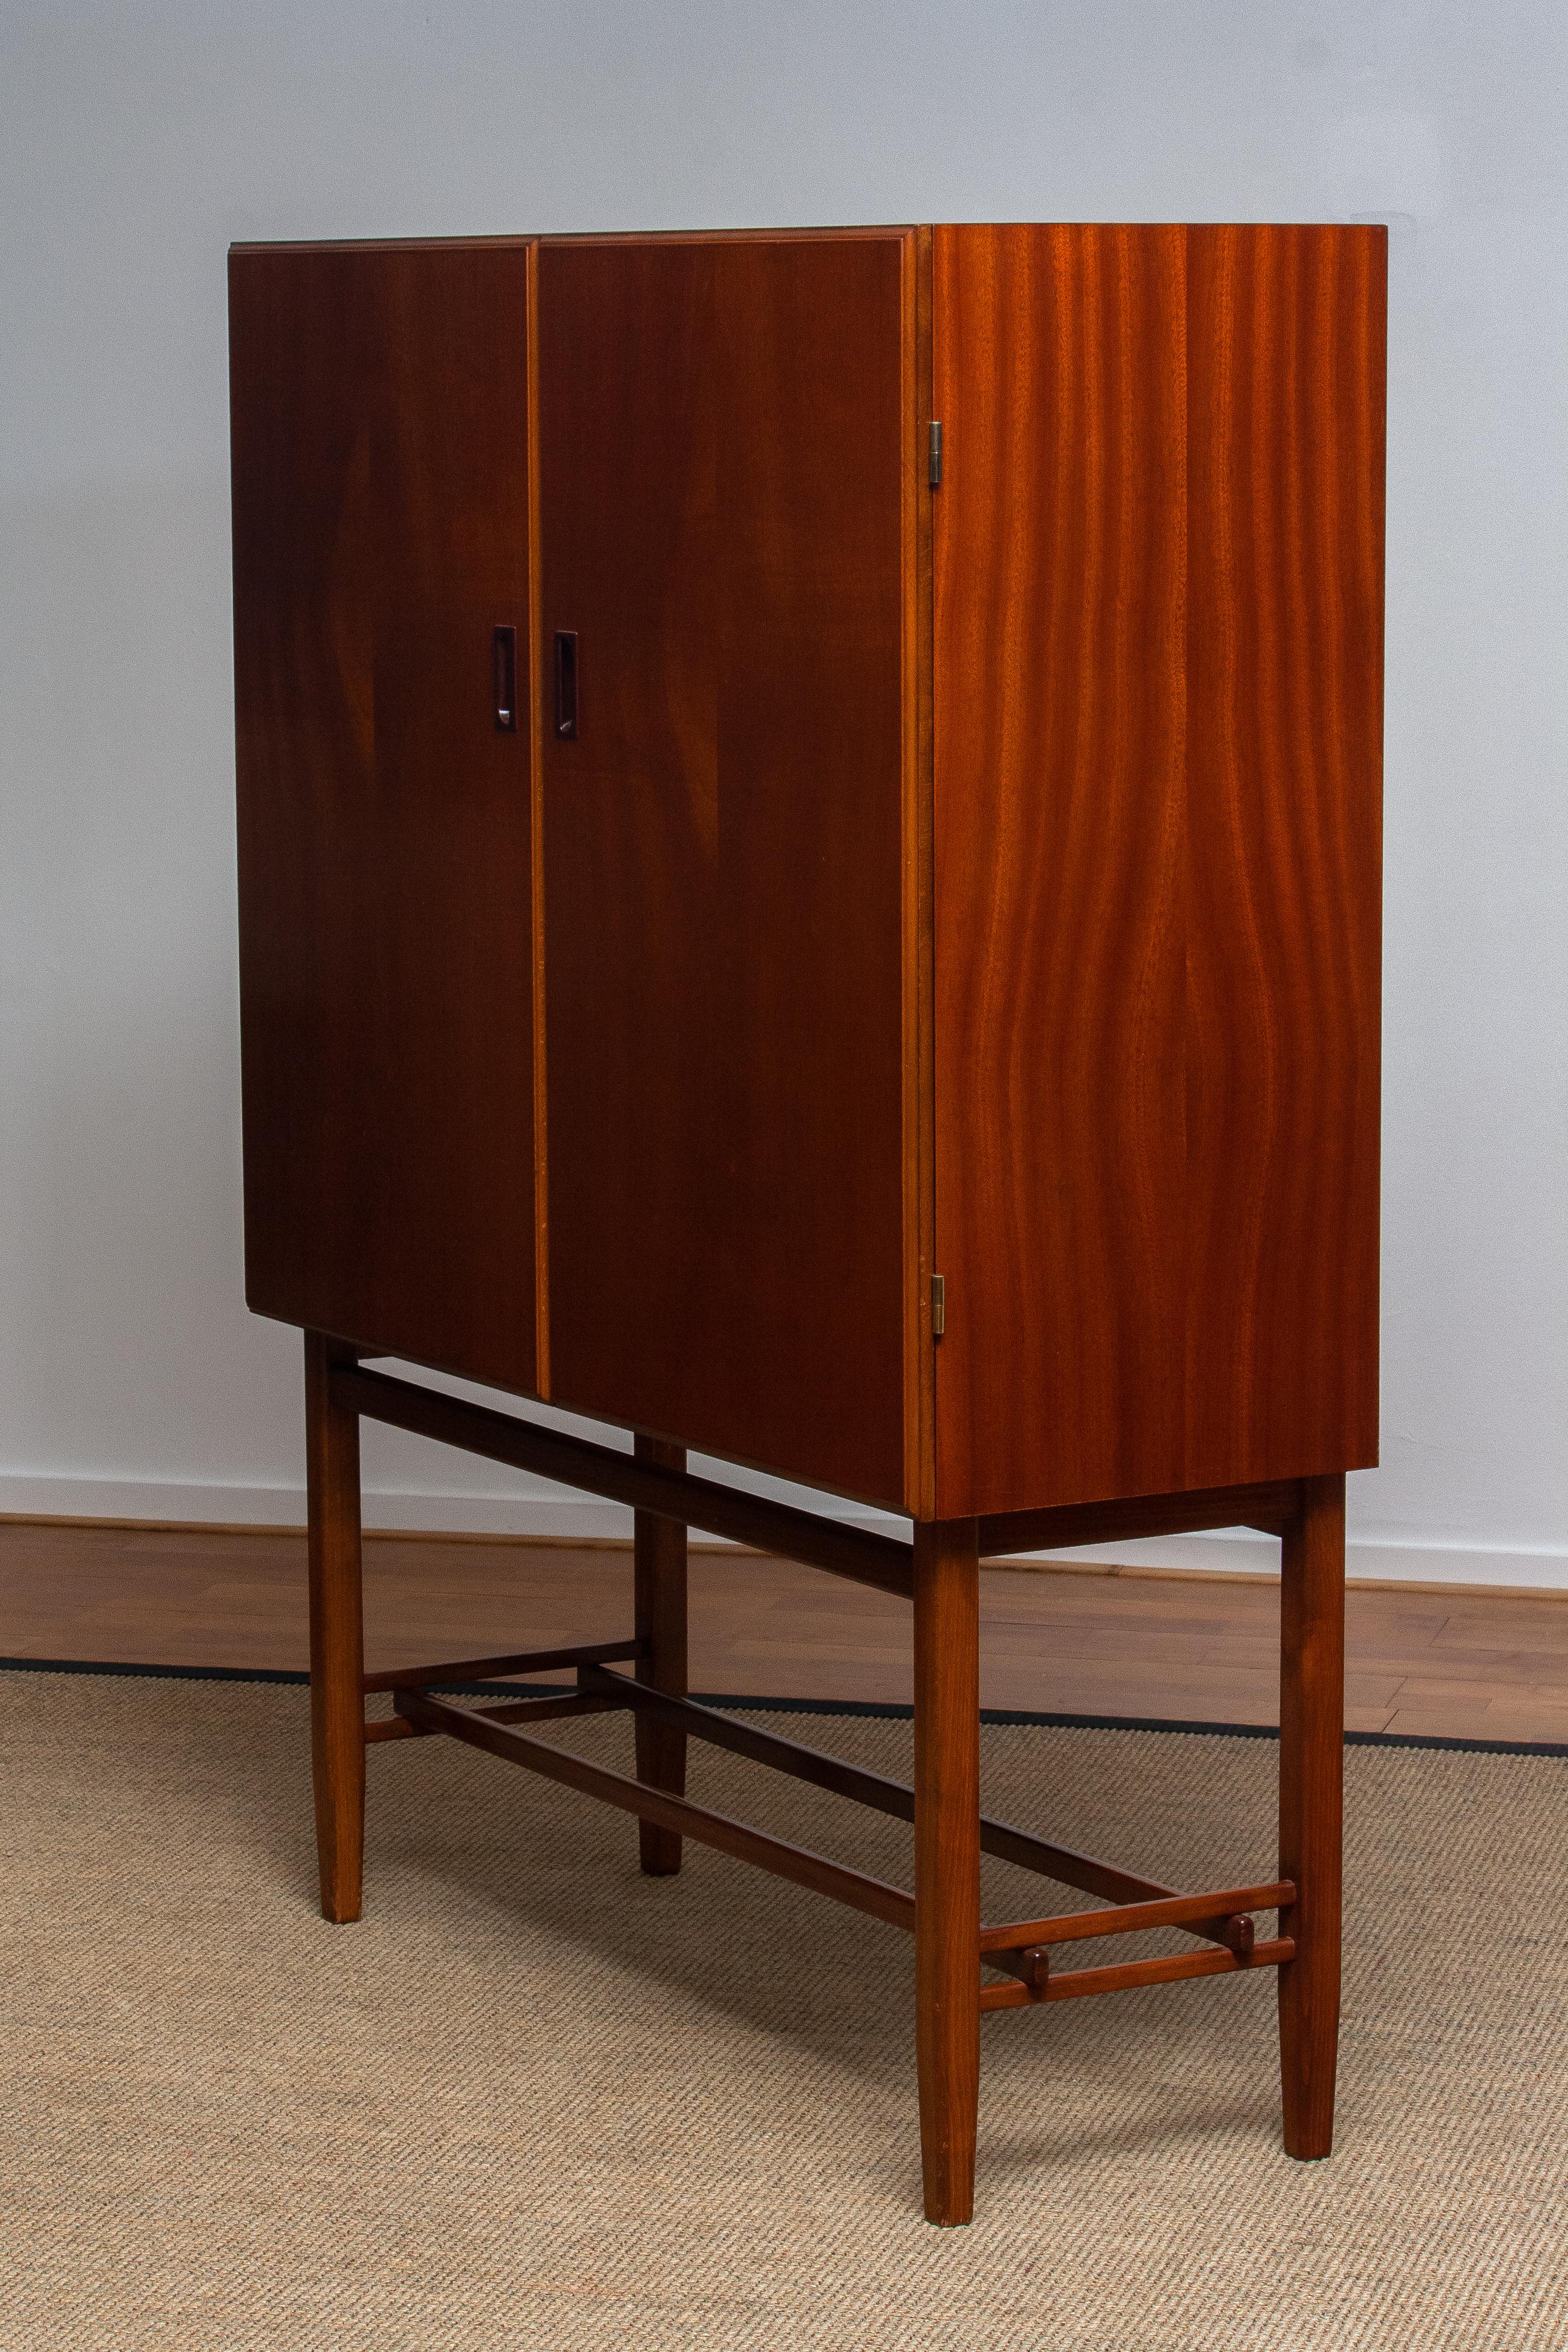 Mid-20th Century 1950s, Slim Midcentury Mahogany Dry Bar / Cabinet by Forenades Mobler, Sweden